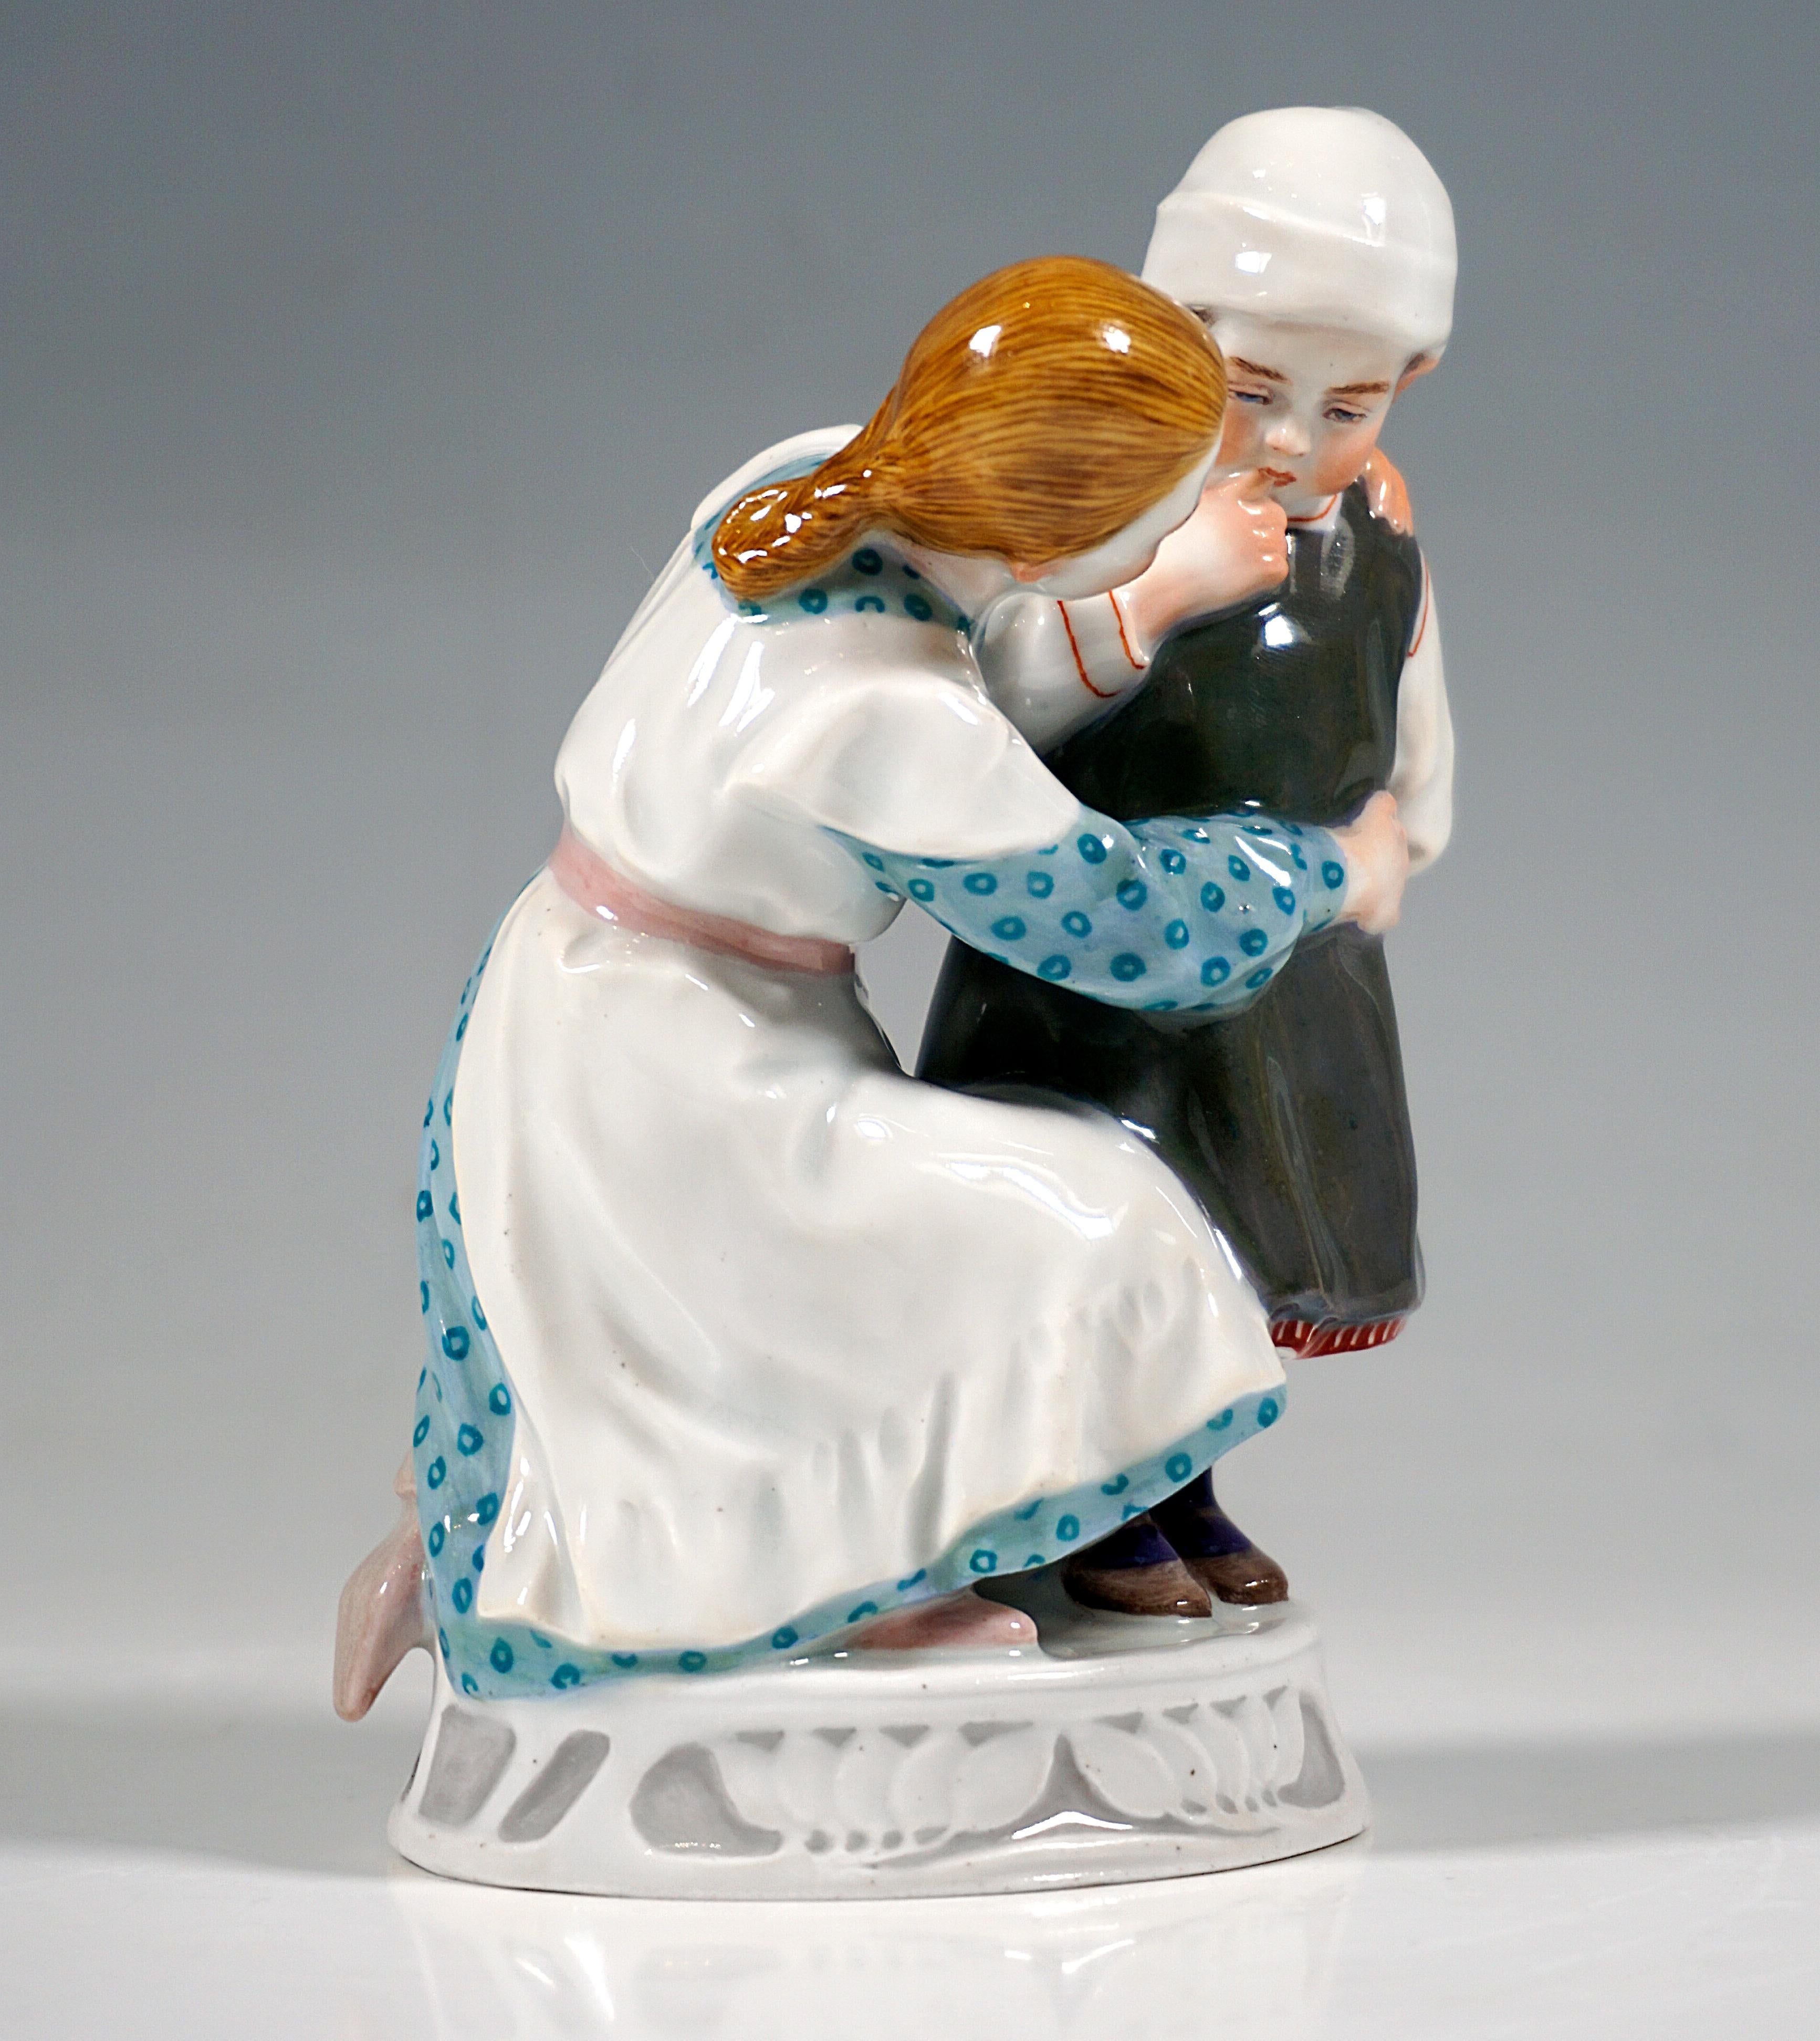 Extremely rare Meissen Art Nouveau porcelain group:
Girl and child in clothes from around 1900, the girl in a blue, polka-dot long-sleeved dress with a white apron kneeling on the floor and hugging and comforting a small standing child in a